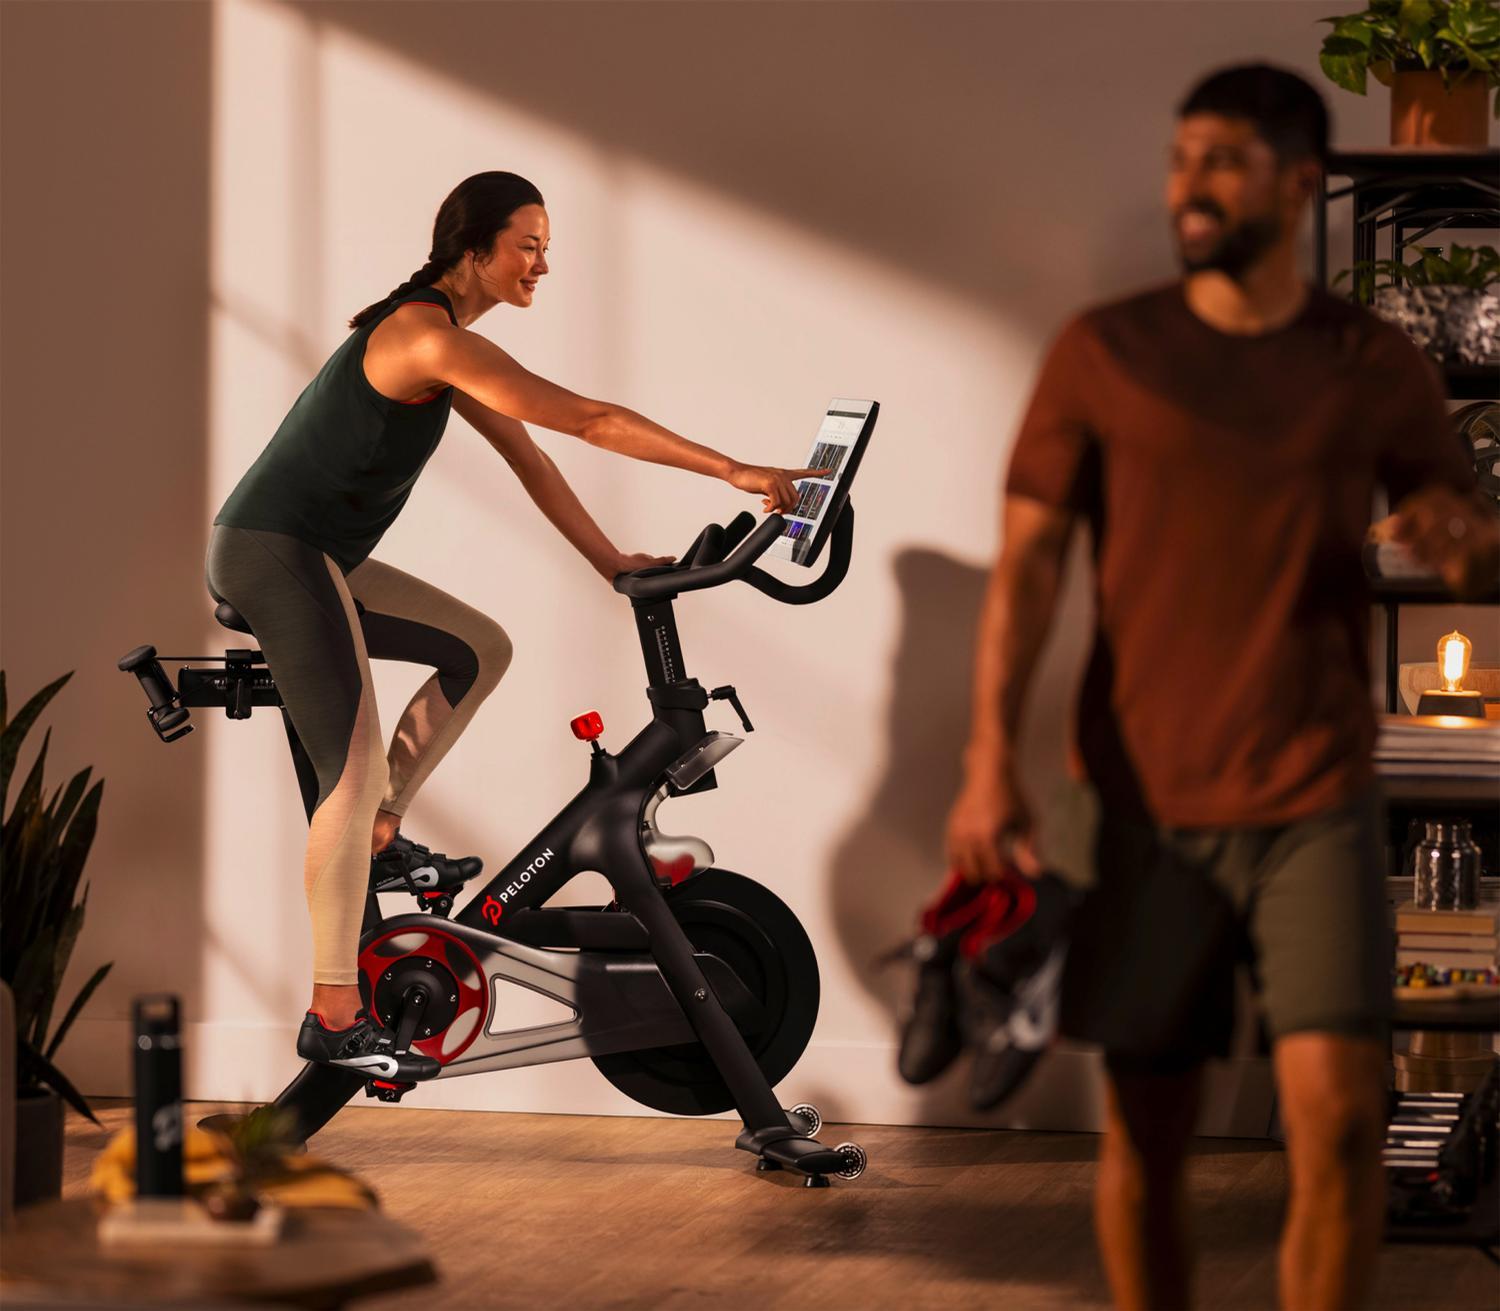 Peloton is offering £500 or US$600 off Bike, Bike+ and tread packages / Peloton